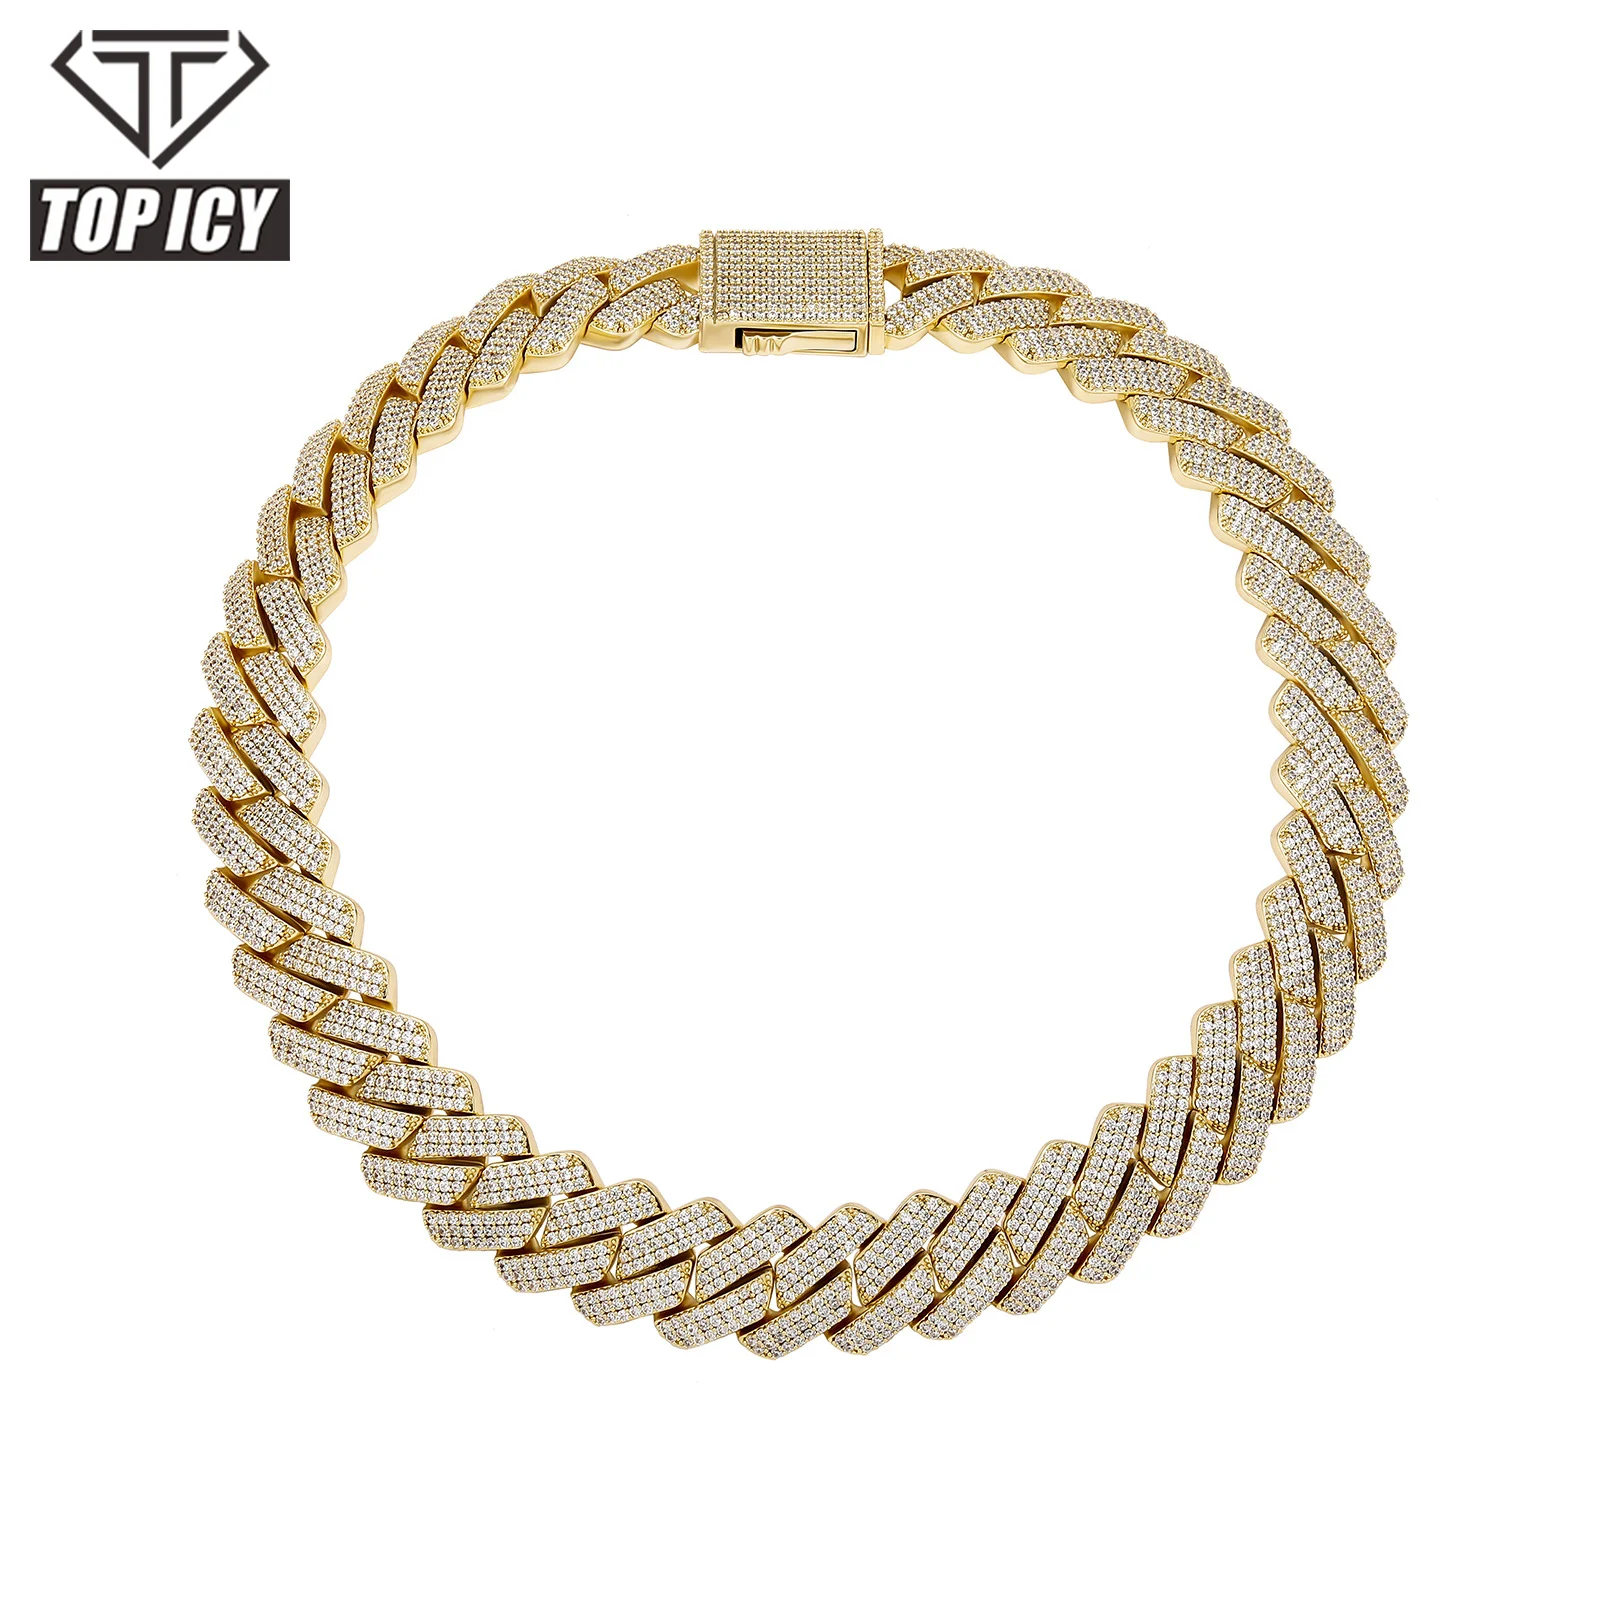 

New Arrival 20mm 3 Rows CZ Zircon Big Iced Out Prong Chain Bracelet Hand setting Link Chain Big Silver Gold Miami Cuban Chain, Gold, white gold, rose gold